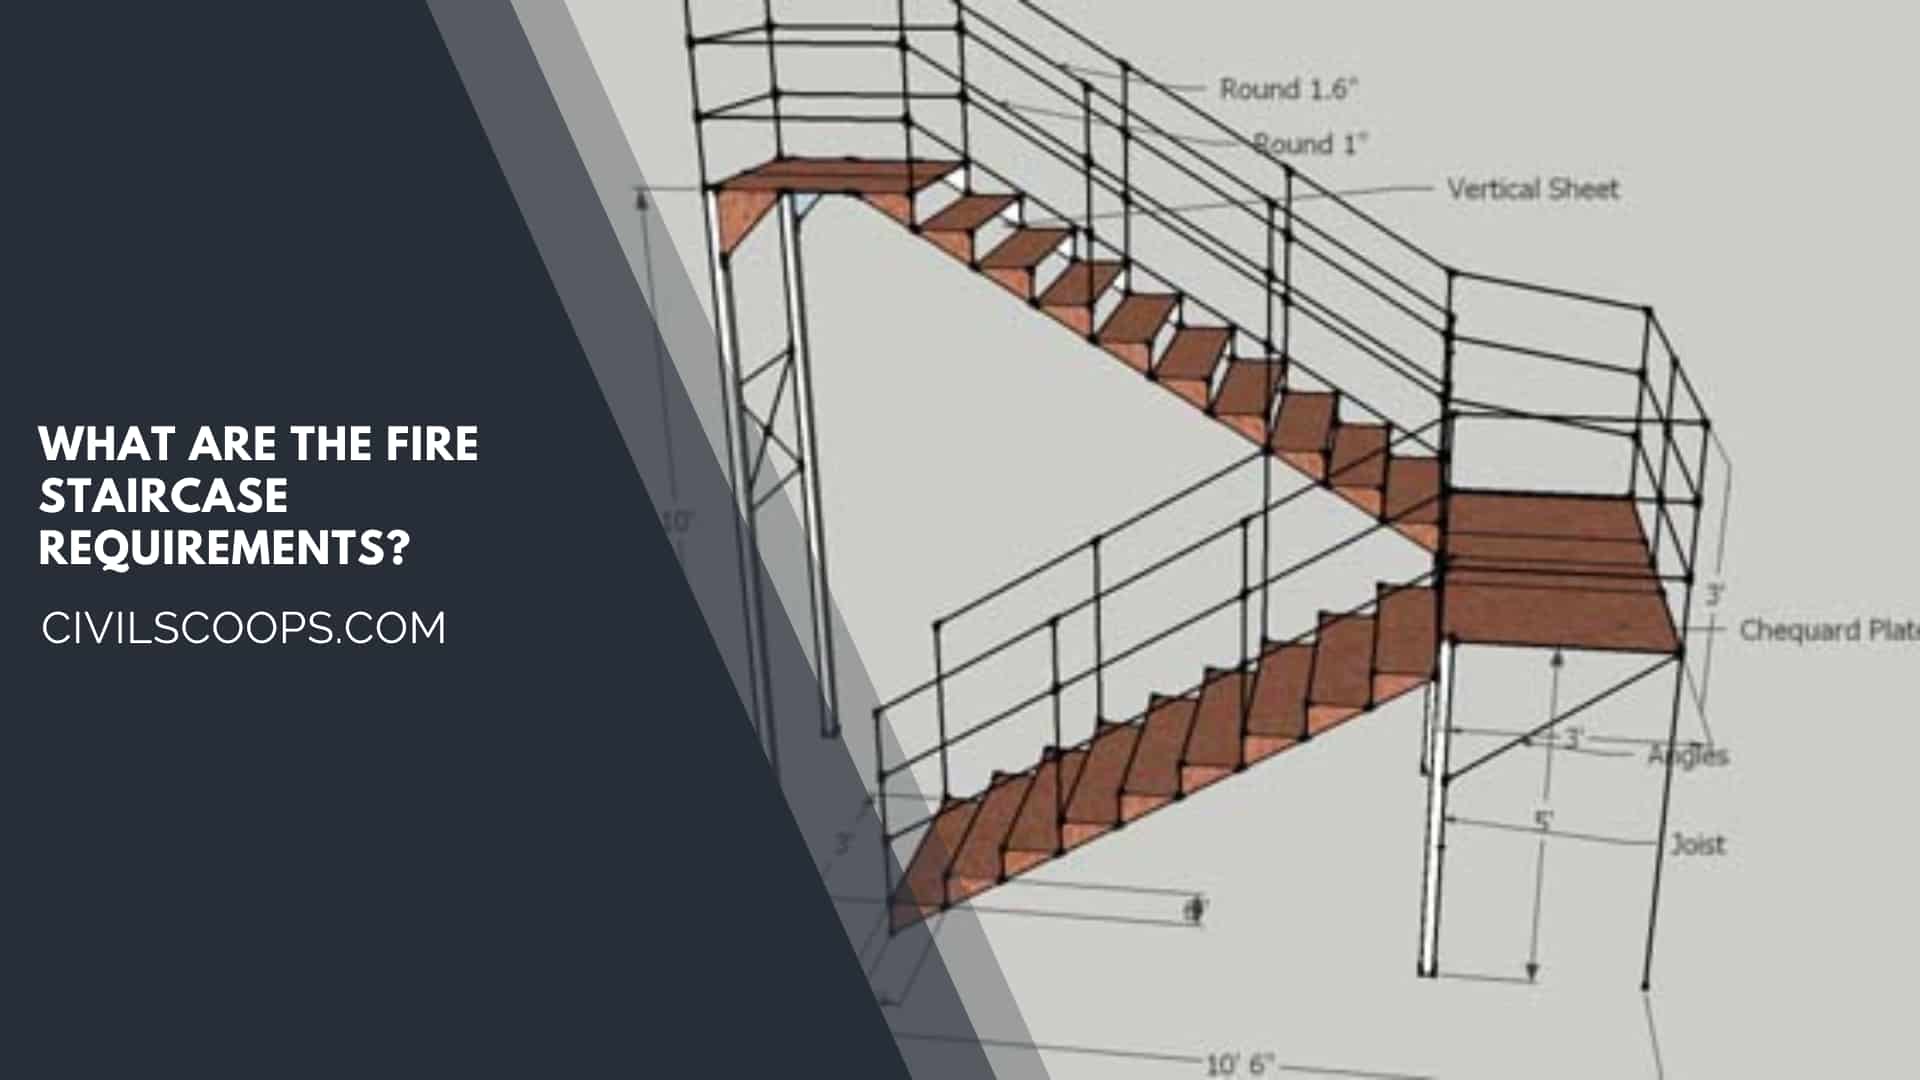 What Are the Fire Staircase Requirements